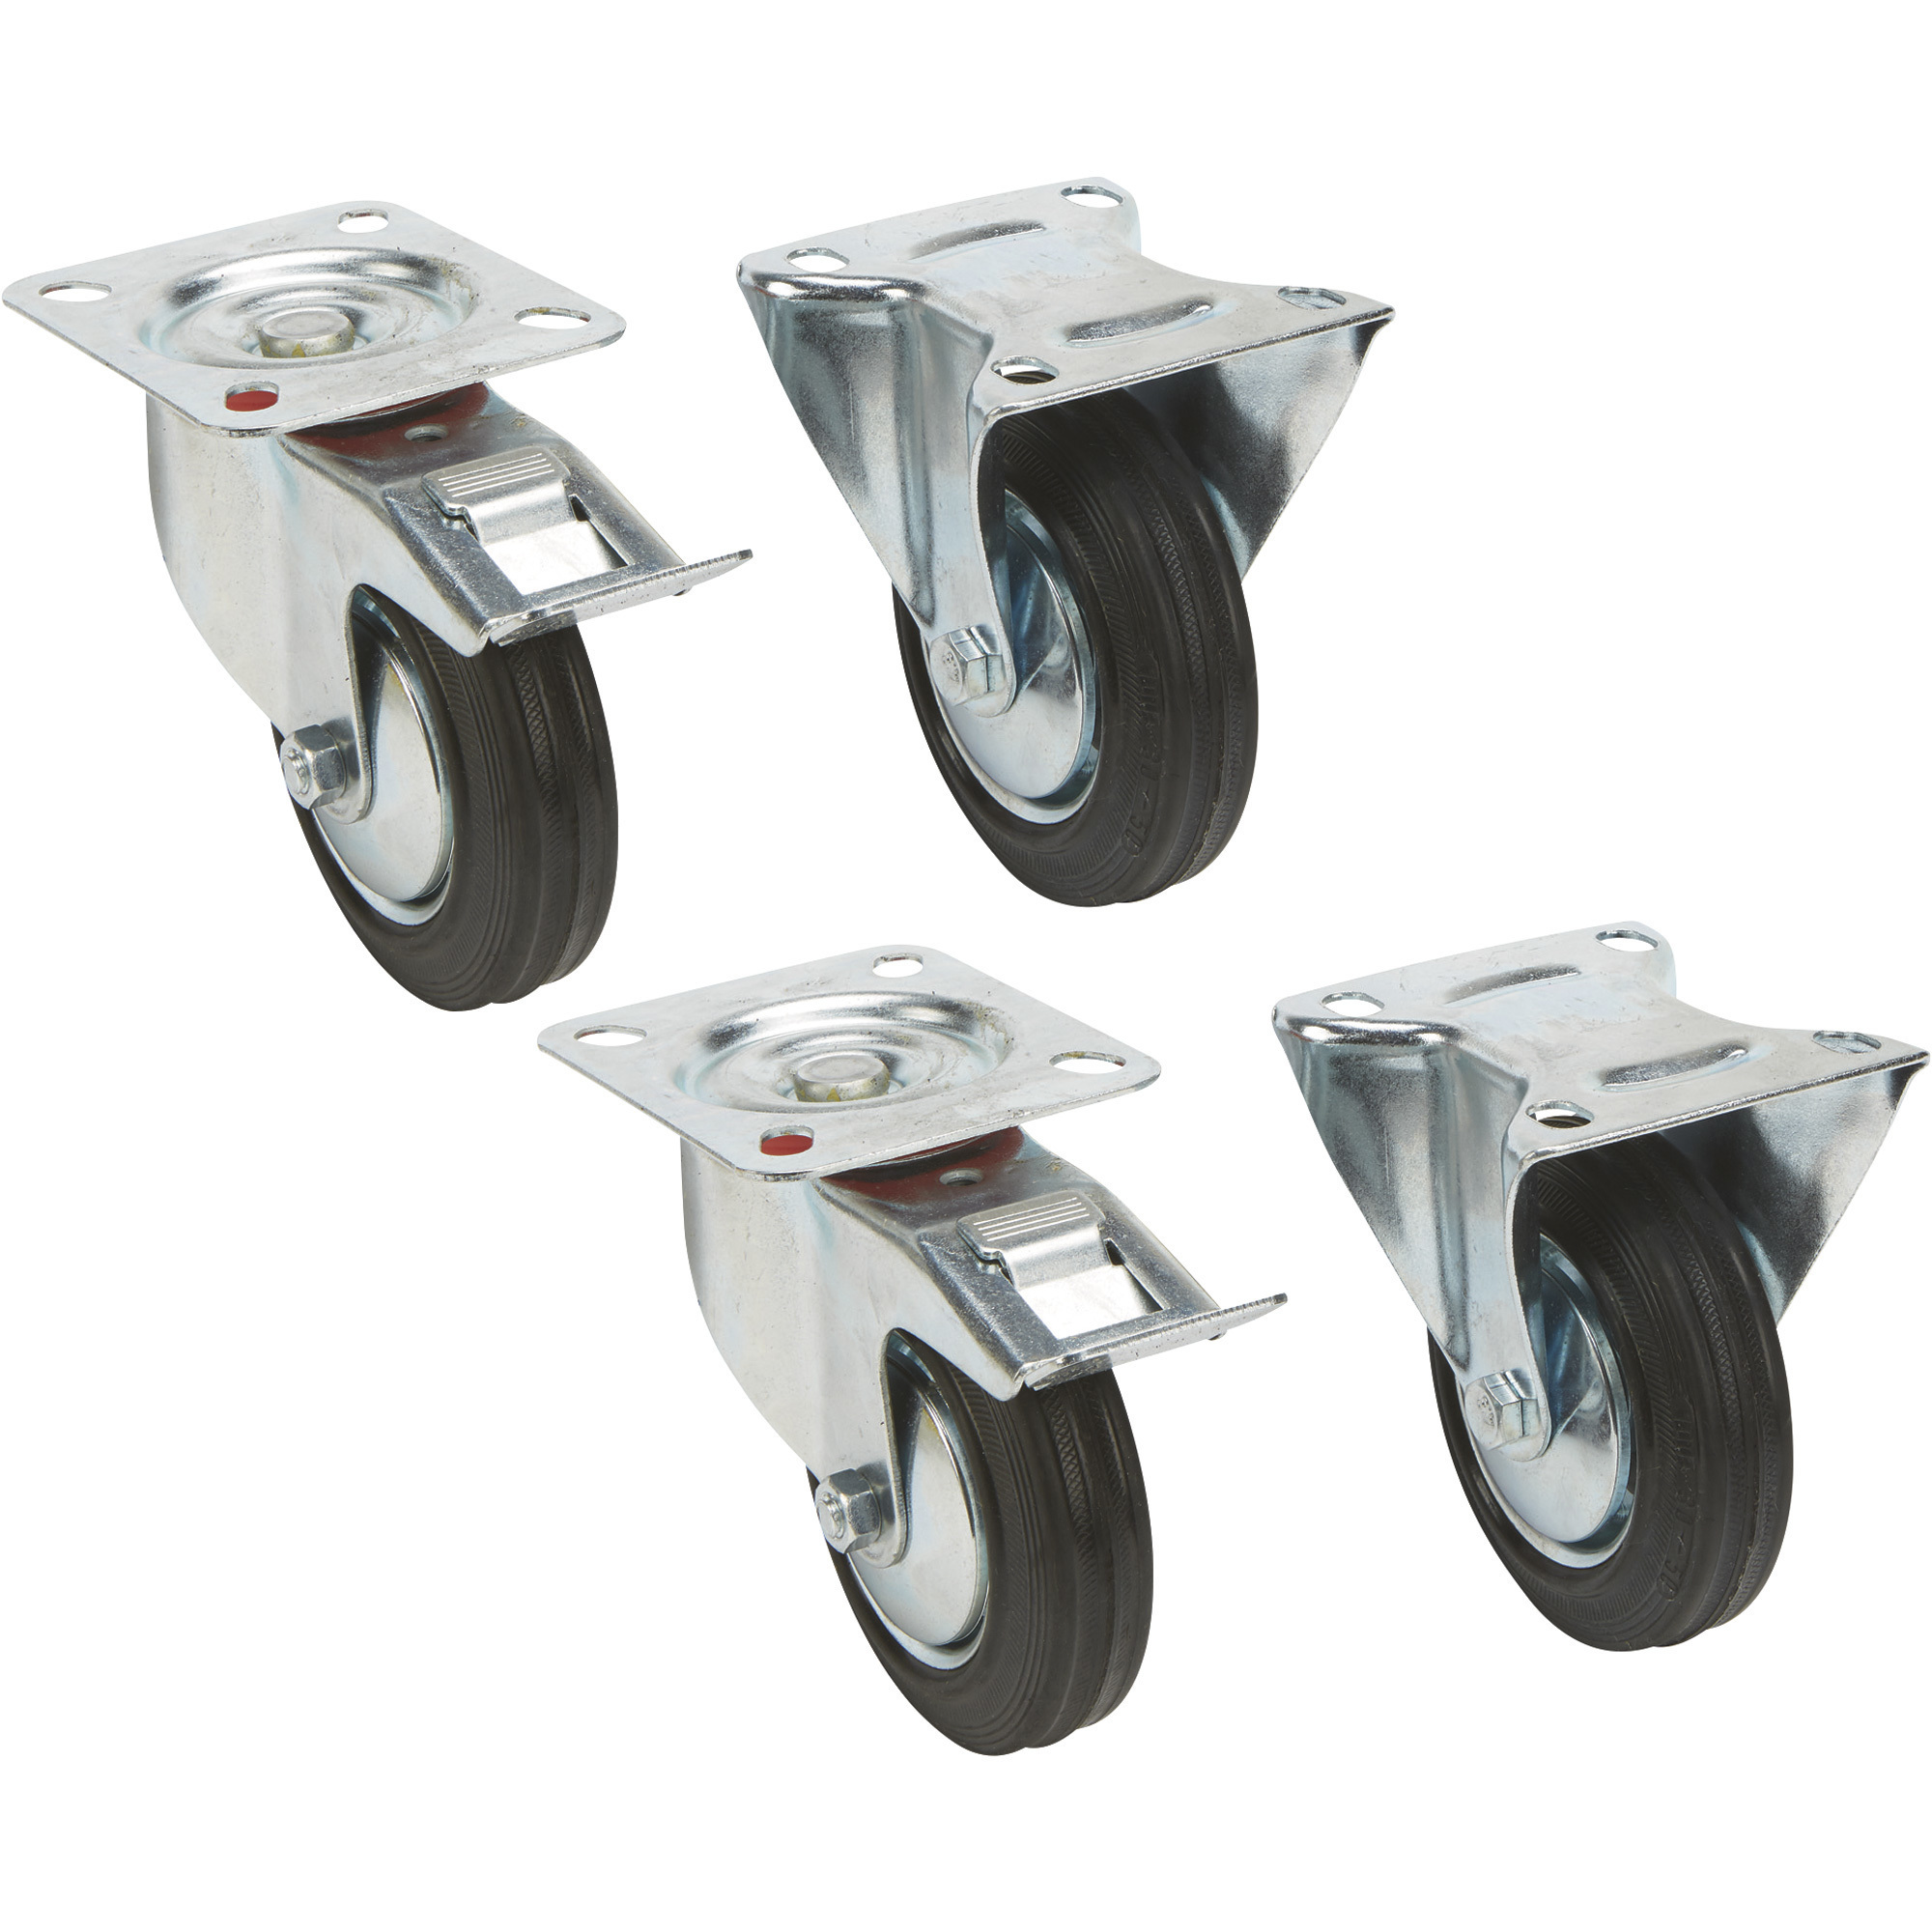 Ironton Rubber Casters, 4-Pack, 4Inch, 650-Lb. Capacity/Set, 155-Lb. Capacity Each